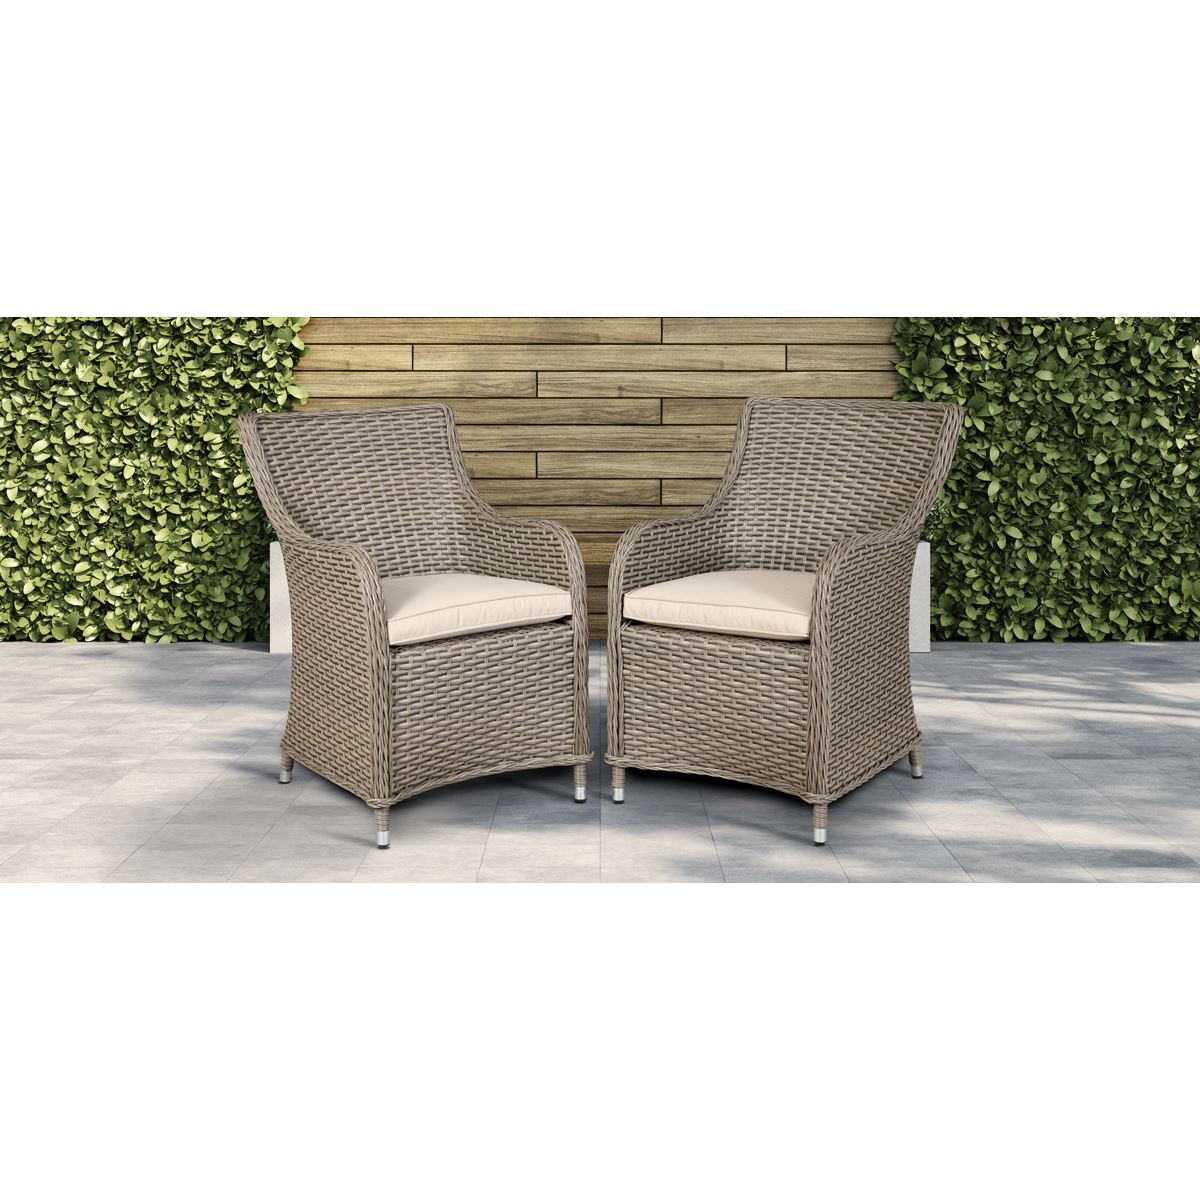 Dellonda Chester Rattan Wicker Garden Dining Chairs with Cushion, Brown